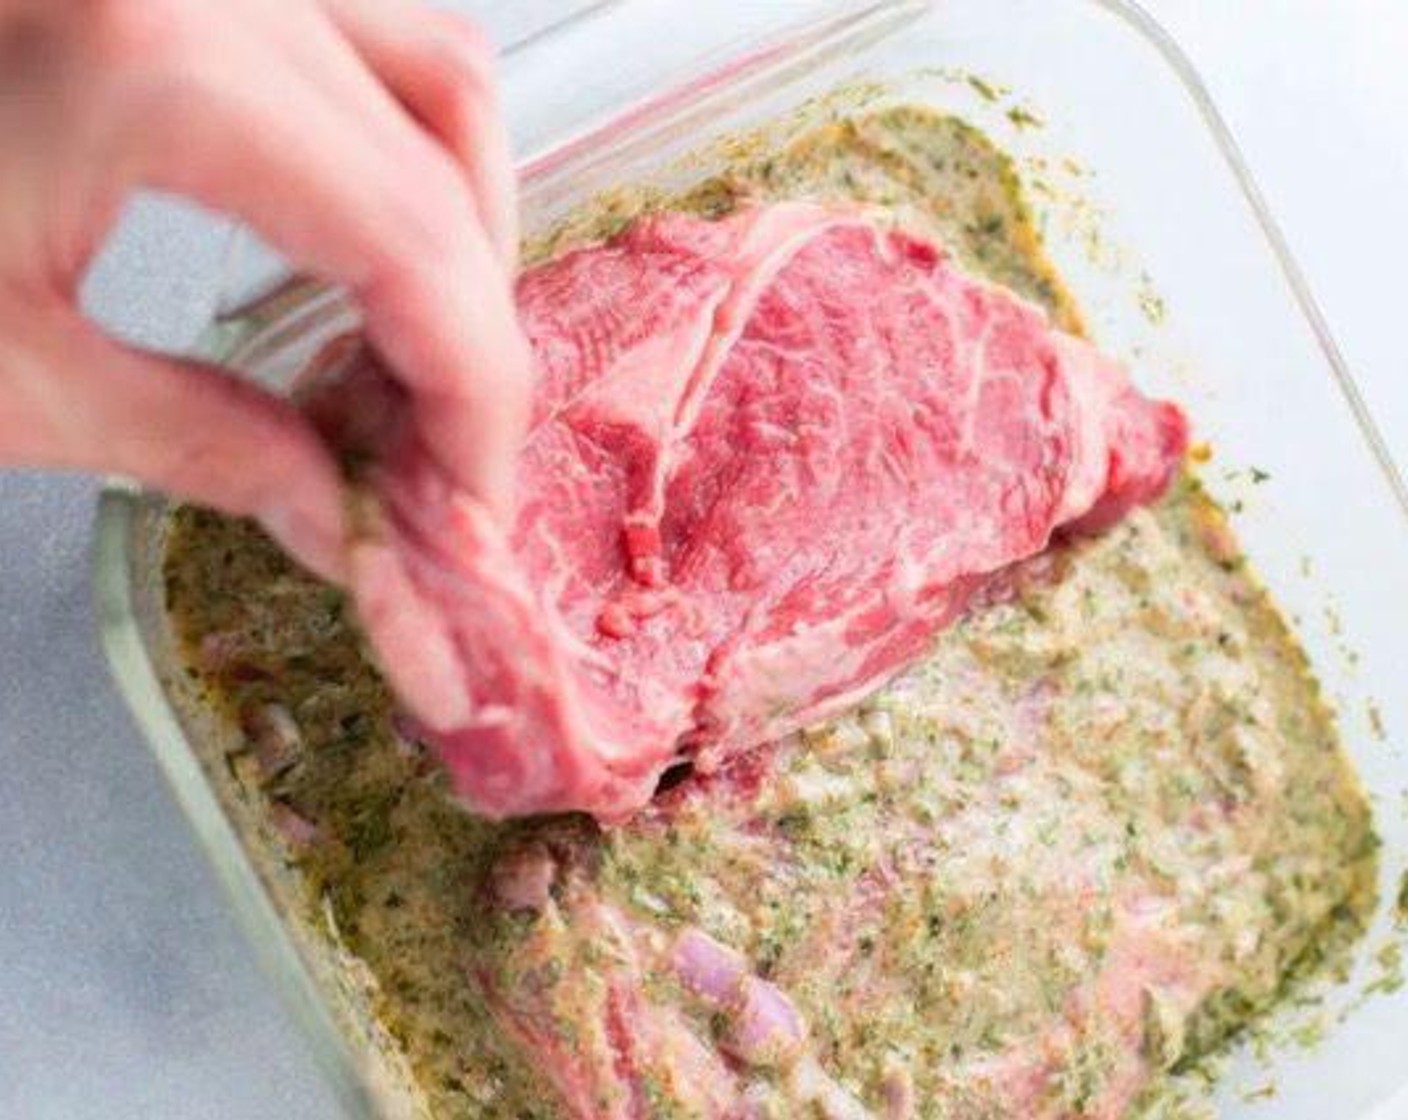 step 2 Place Rib Eye Steak (2) in the marinade, coating both sides of the steaks. Cover and refrigerate at least 8 hours or up to 1 day.